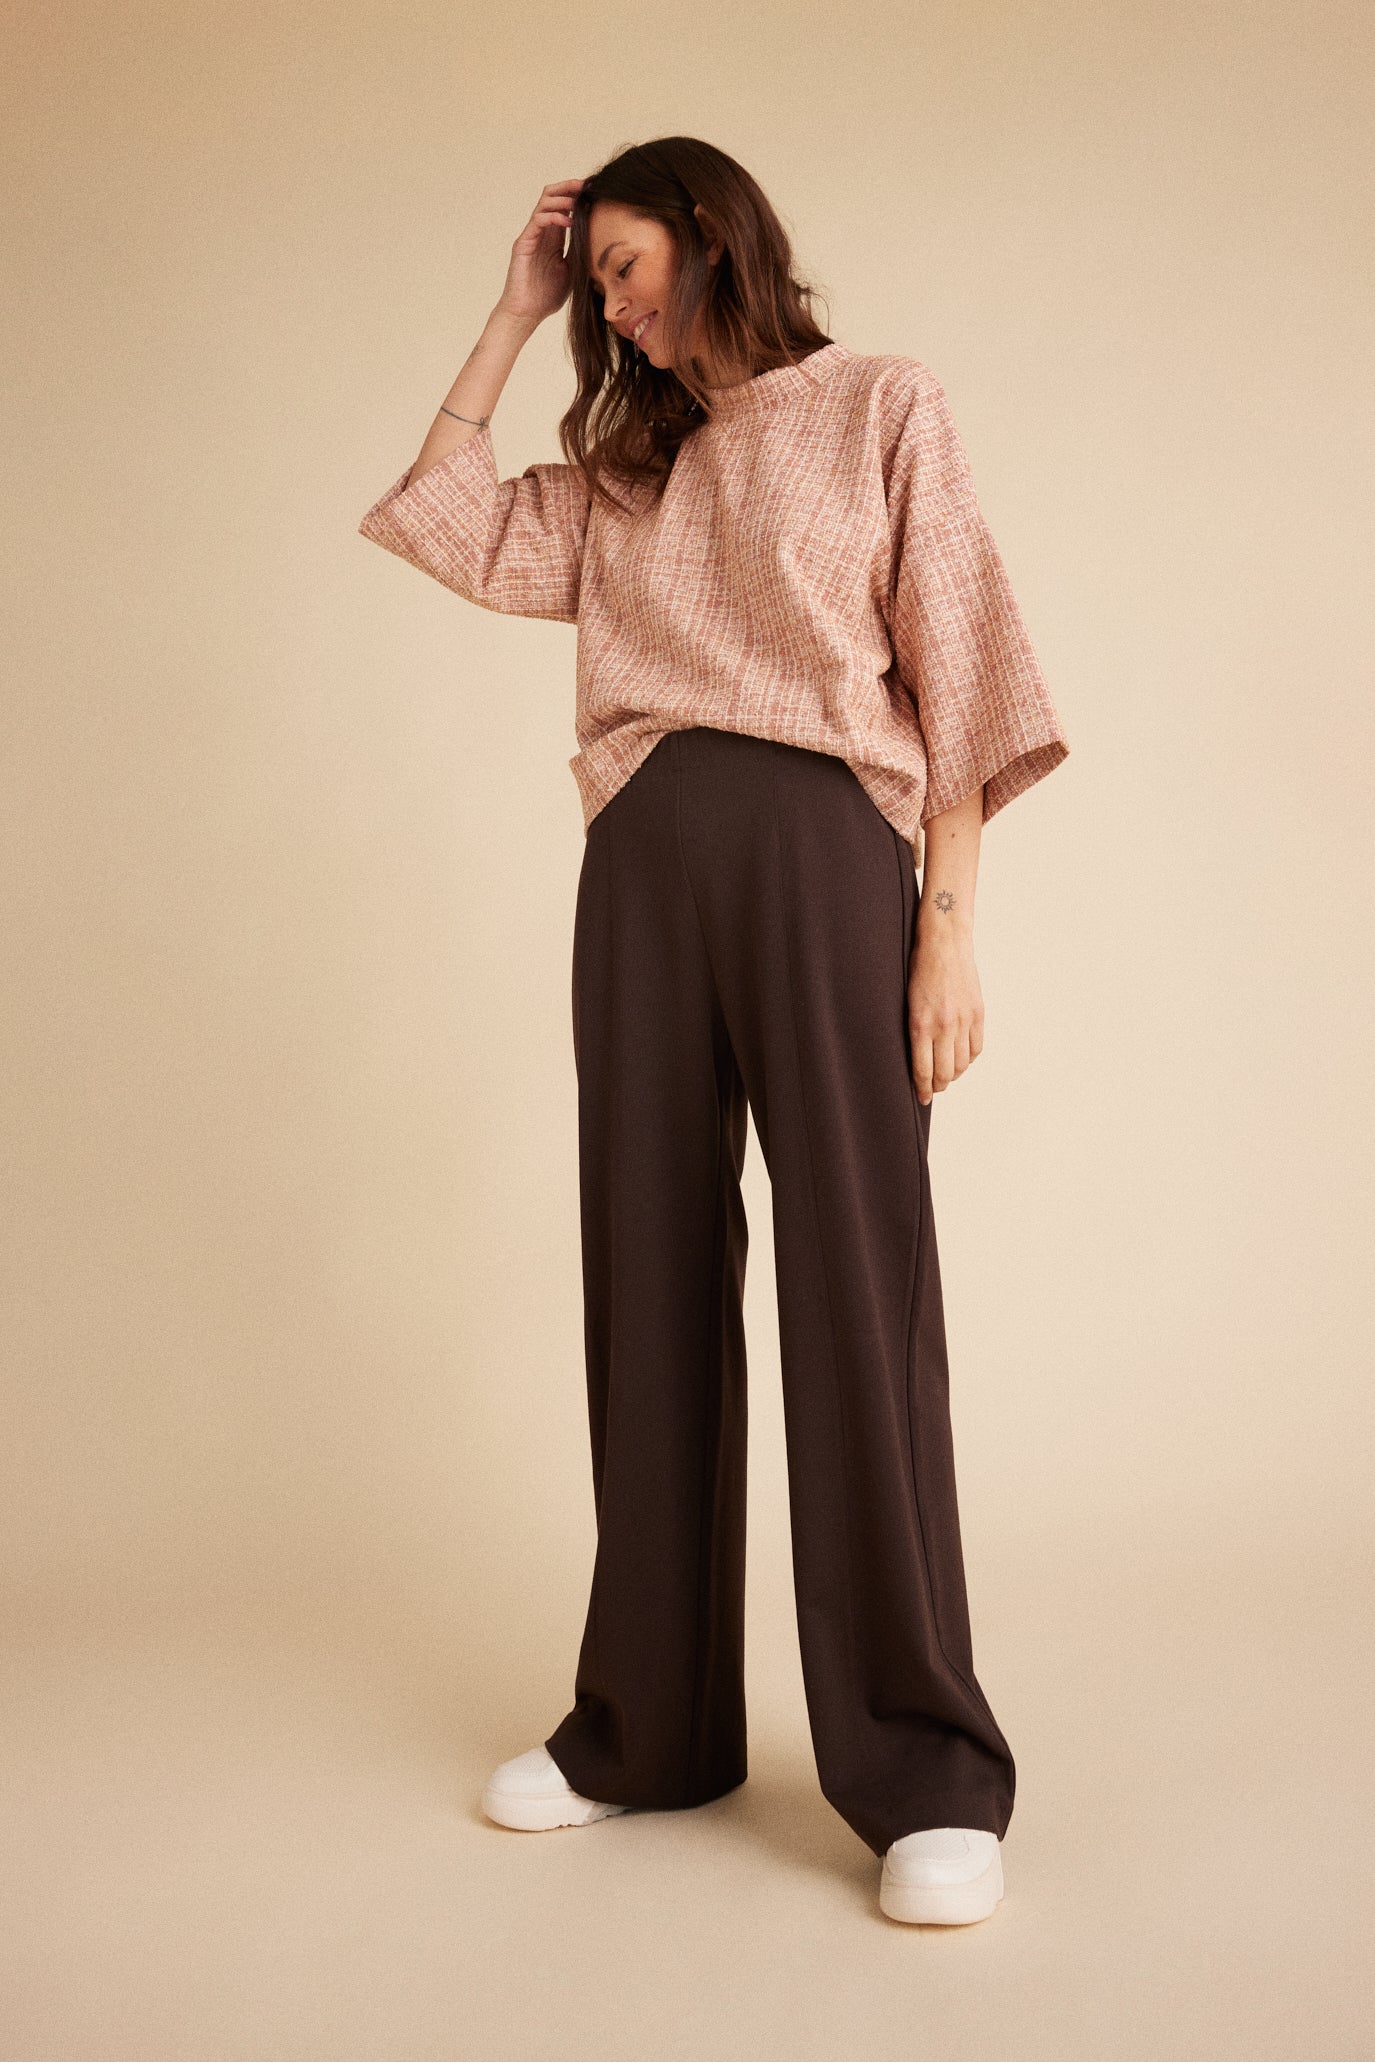 LUXZUZ // ONE TWO Beate Pant Pant 799 Choco Lux